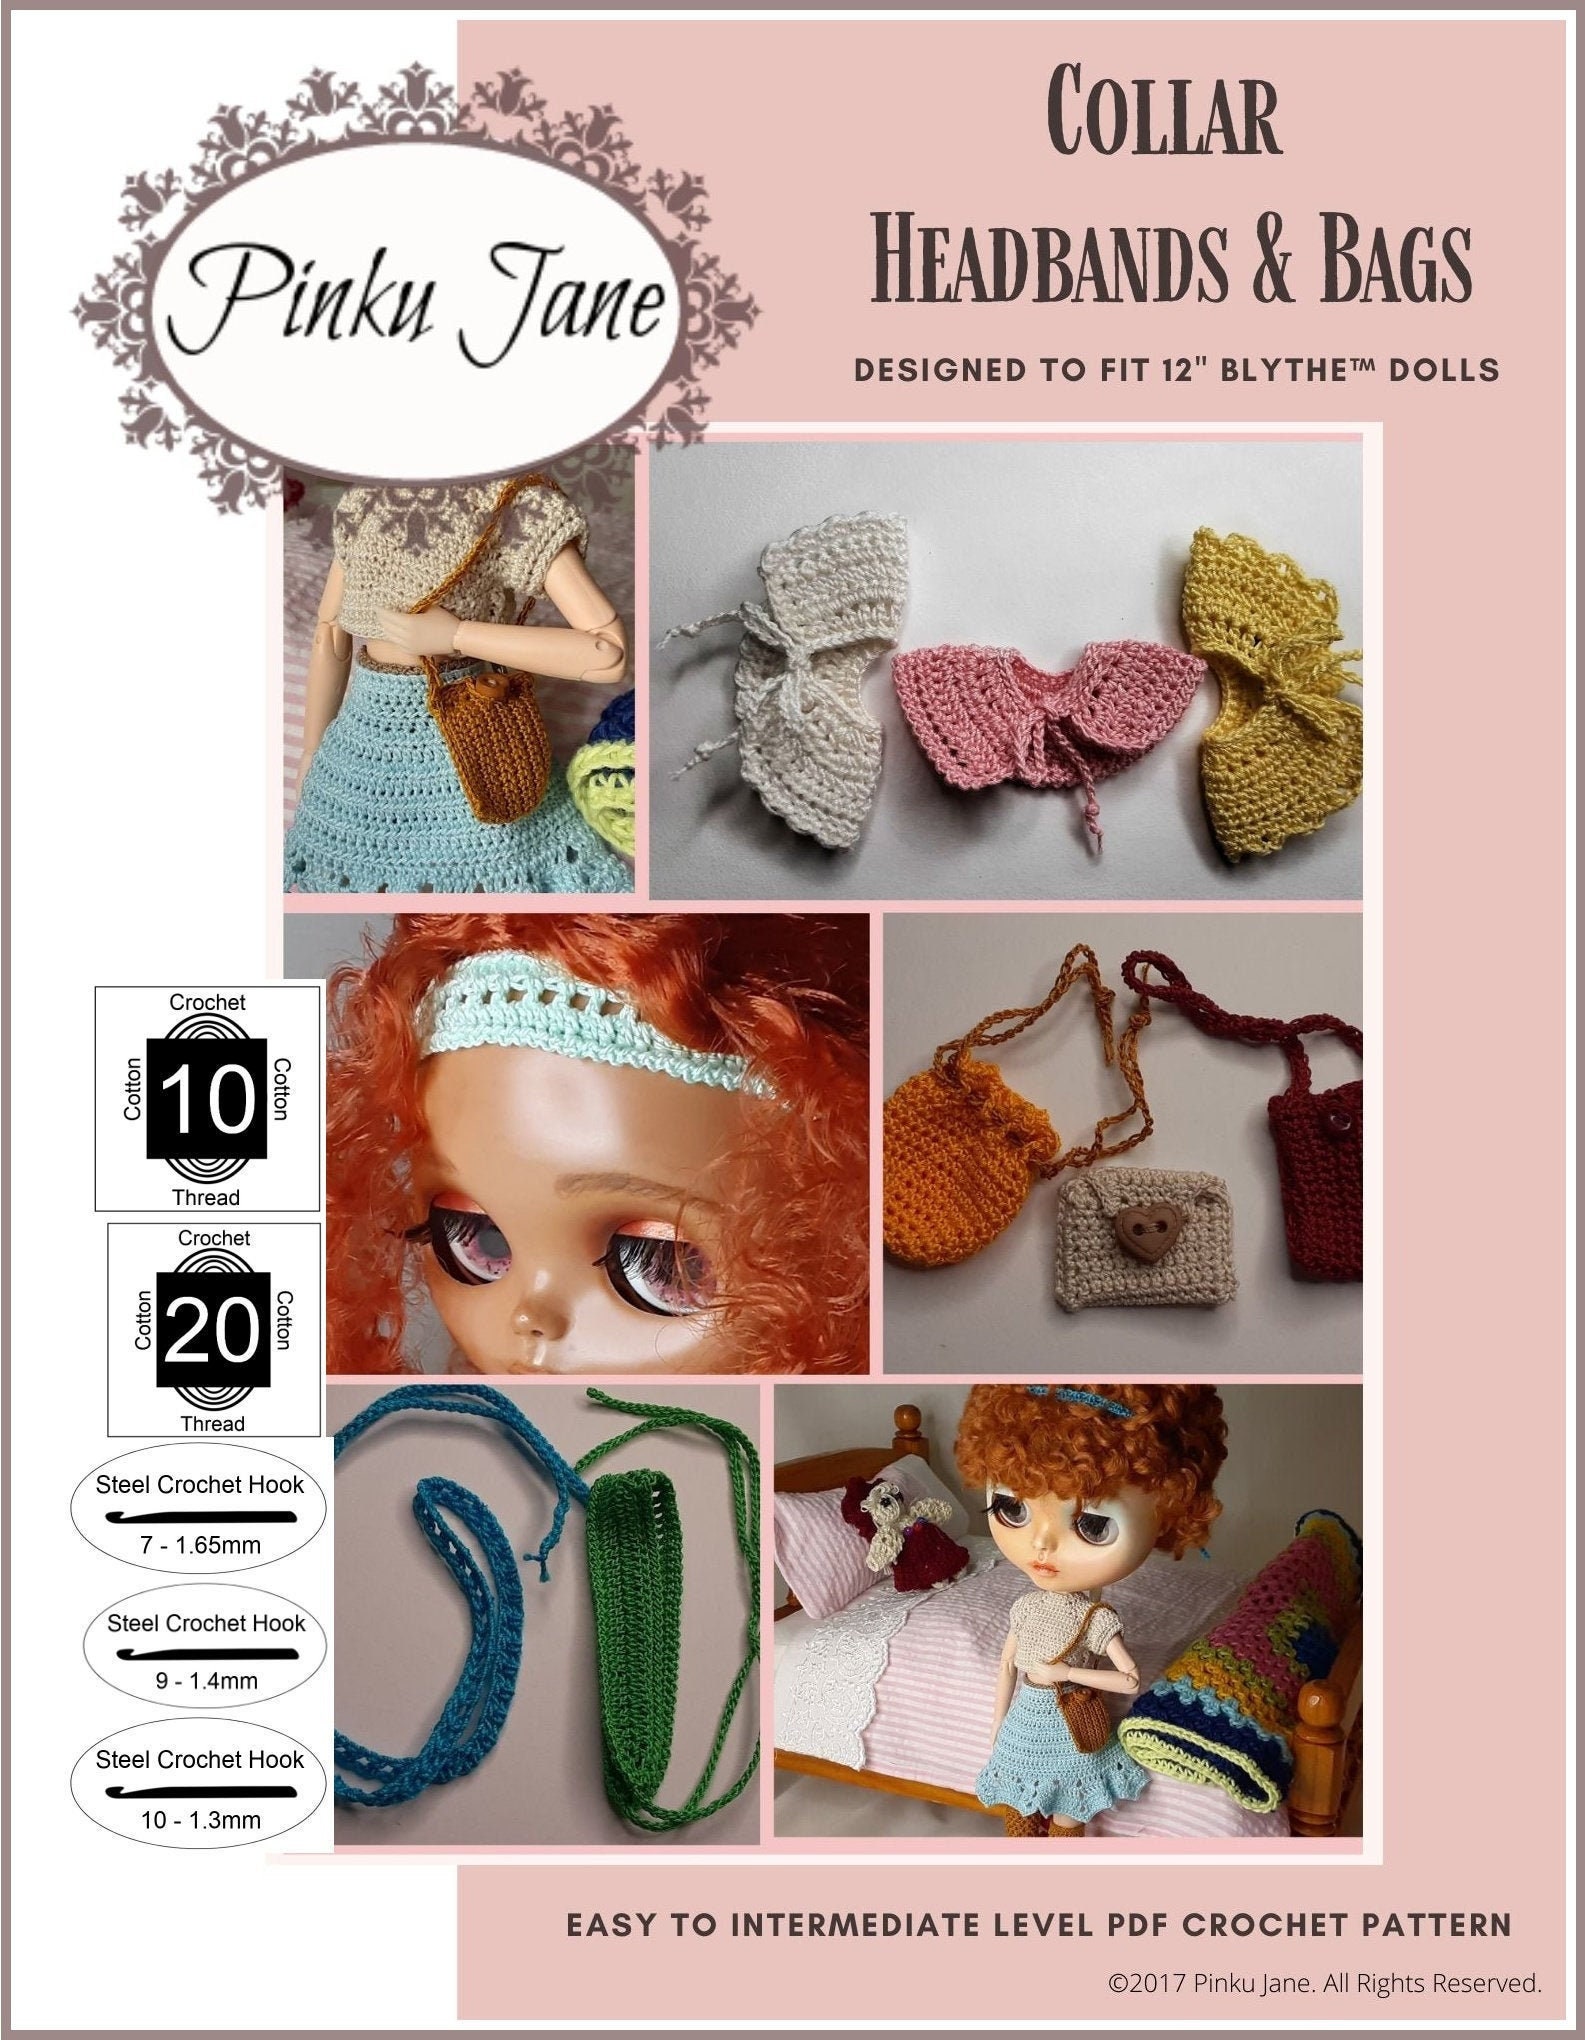 Cotton Yarn Projects Archives - This Pixie Creates